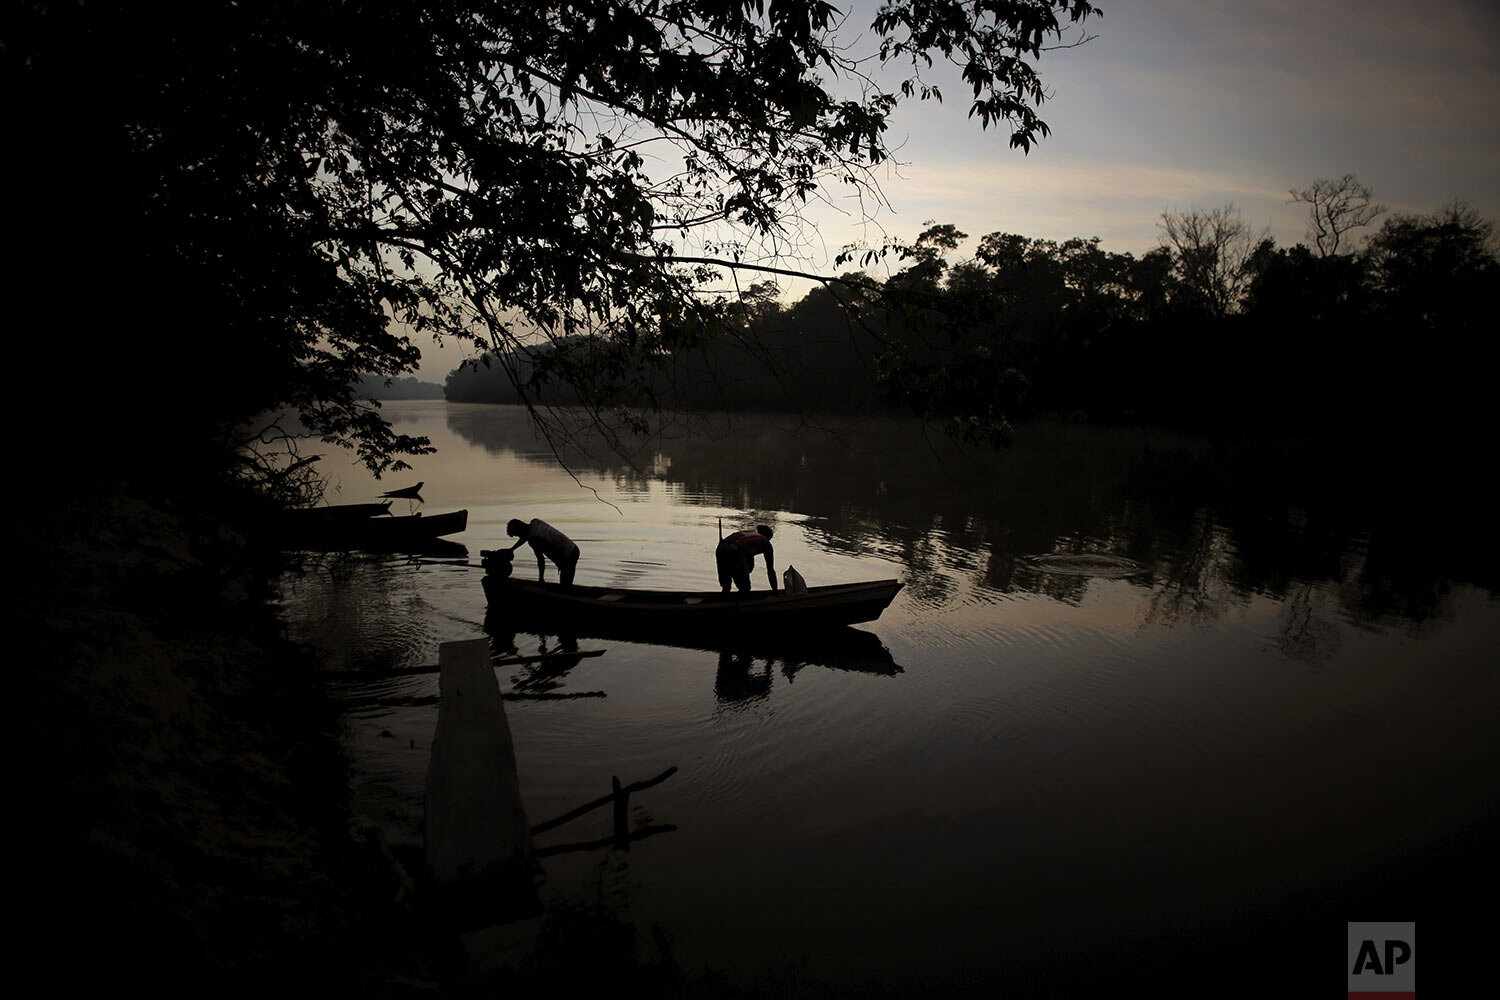  Tenetehara Indigenous men prepare to go out on their boat in the Gurupi River, in the Alto Rio Guama Indigenous Territory, near Paragominas, in the northern Brazilian state of Para, Monday, Sept. 7, 2020. (AP Photo/Eraldo Peres) 